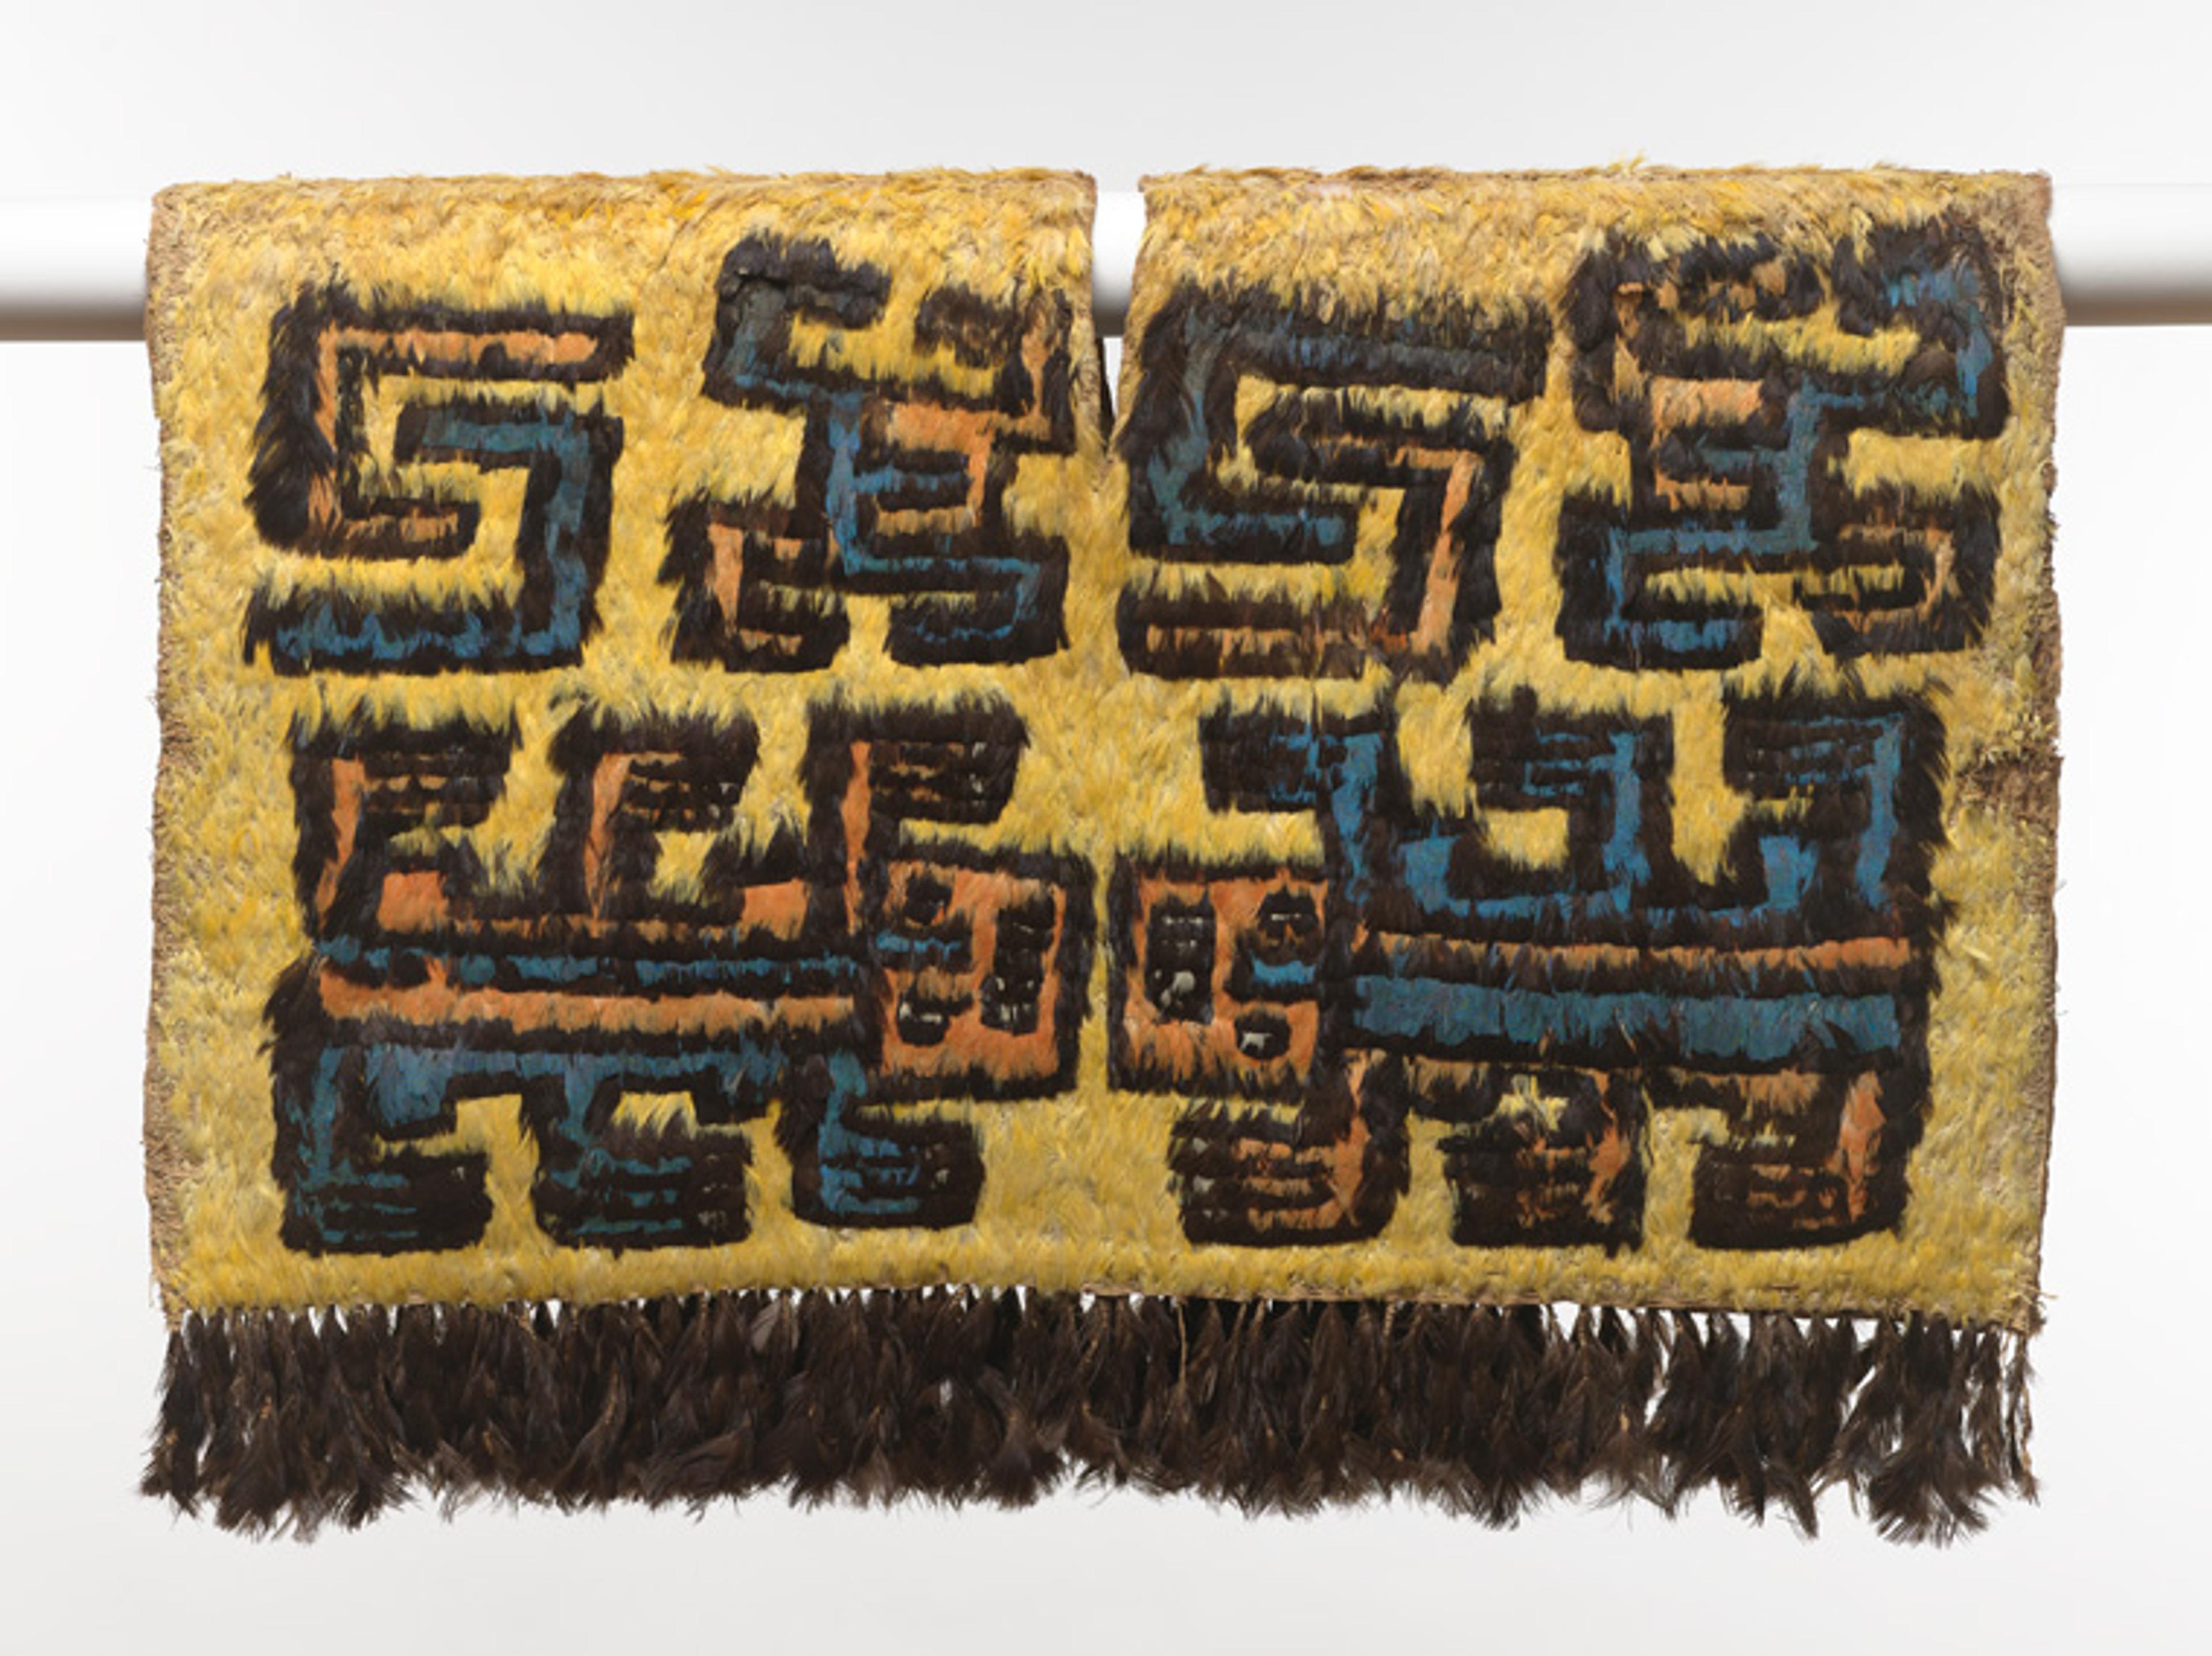 Peruvian textile with an intricate design of lizard-like creatures